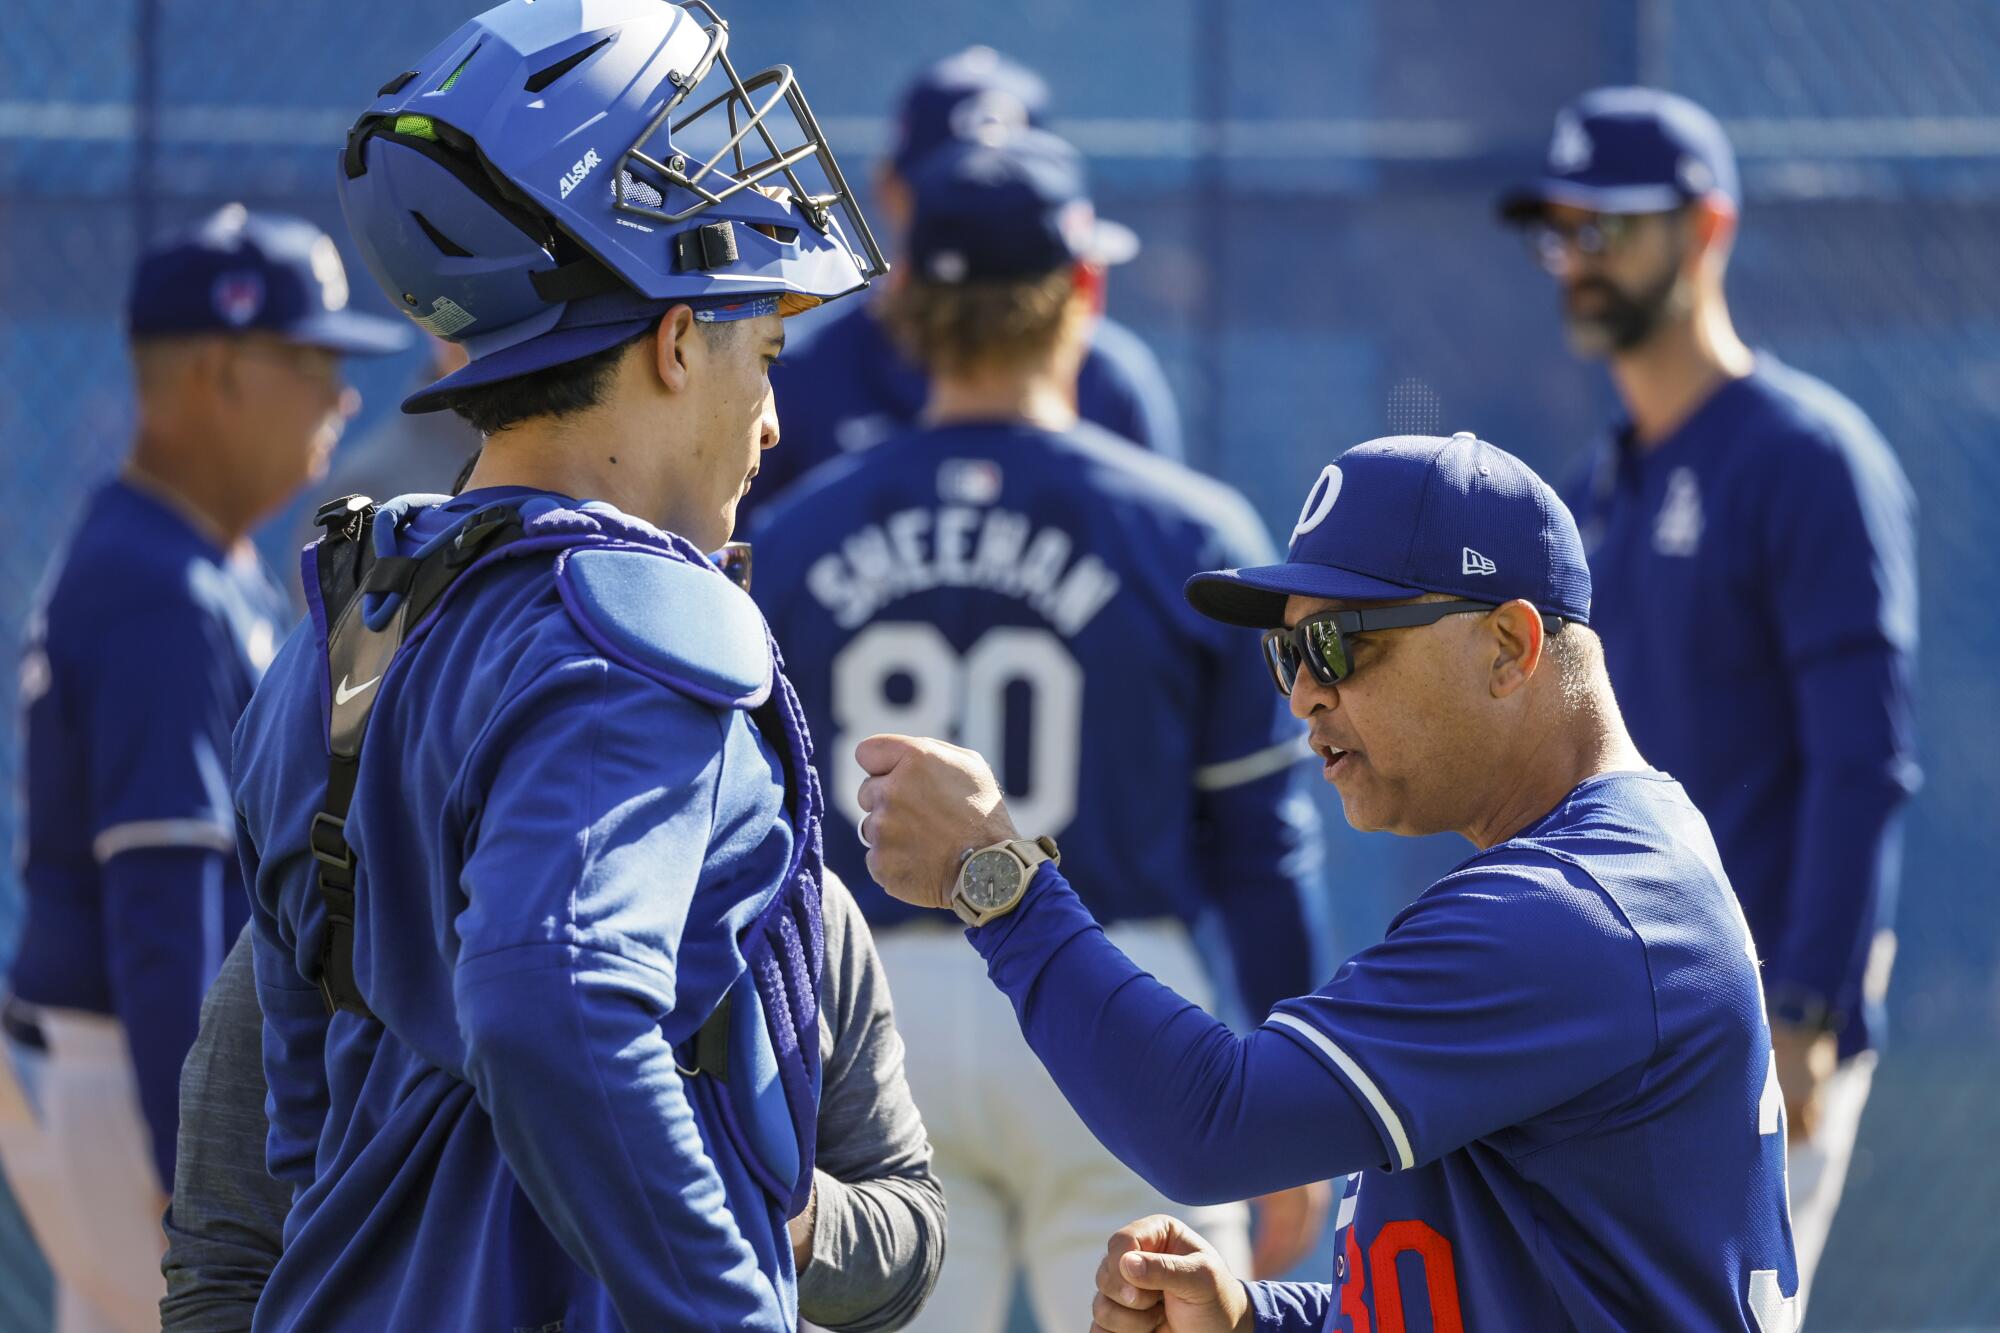 Dodgers manager Dave Roberts delivers a spirited talk to catcher Diego Cartaya at a spring training workout.